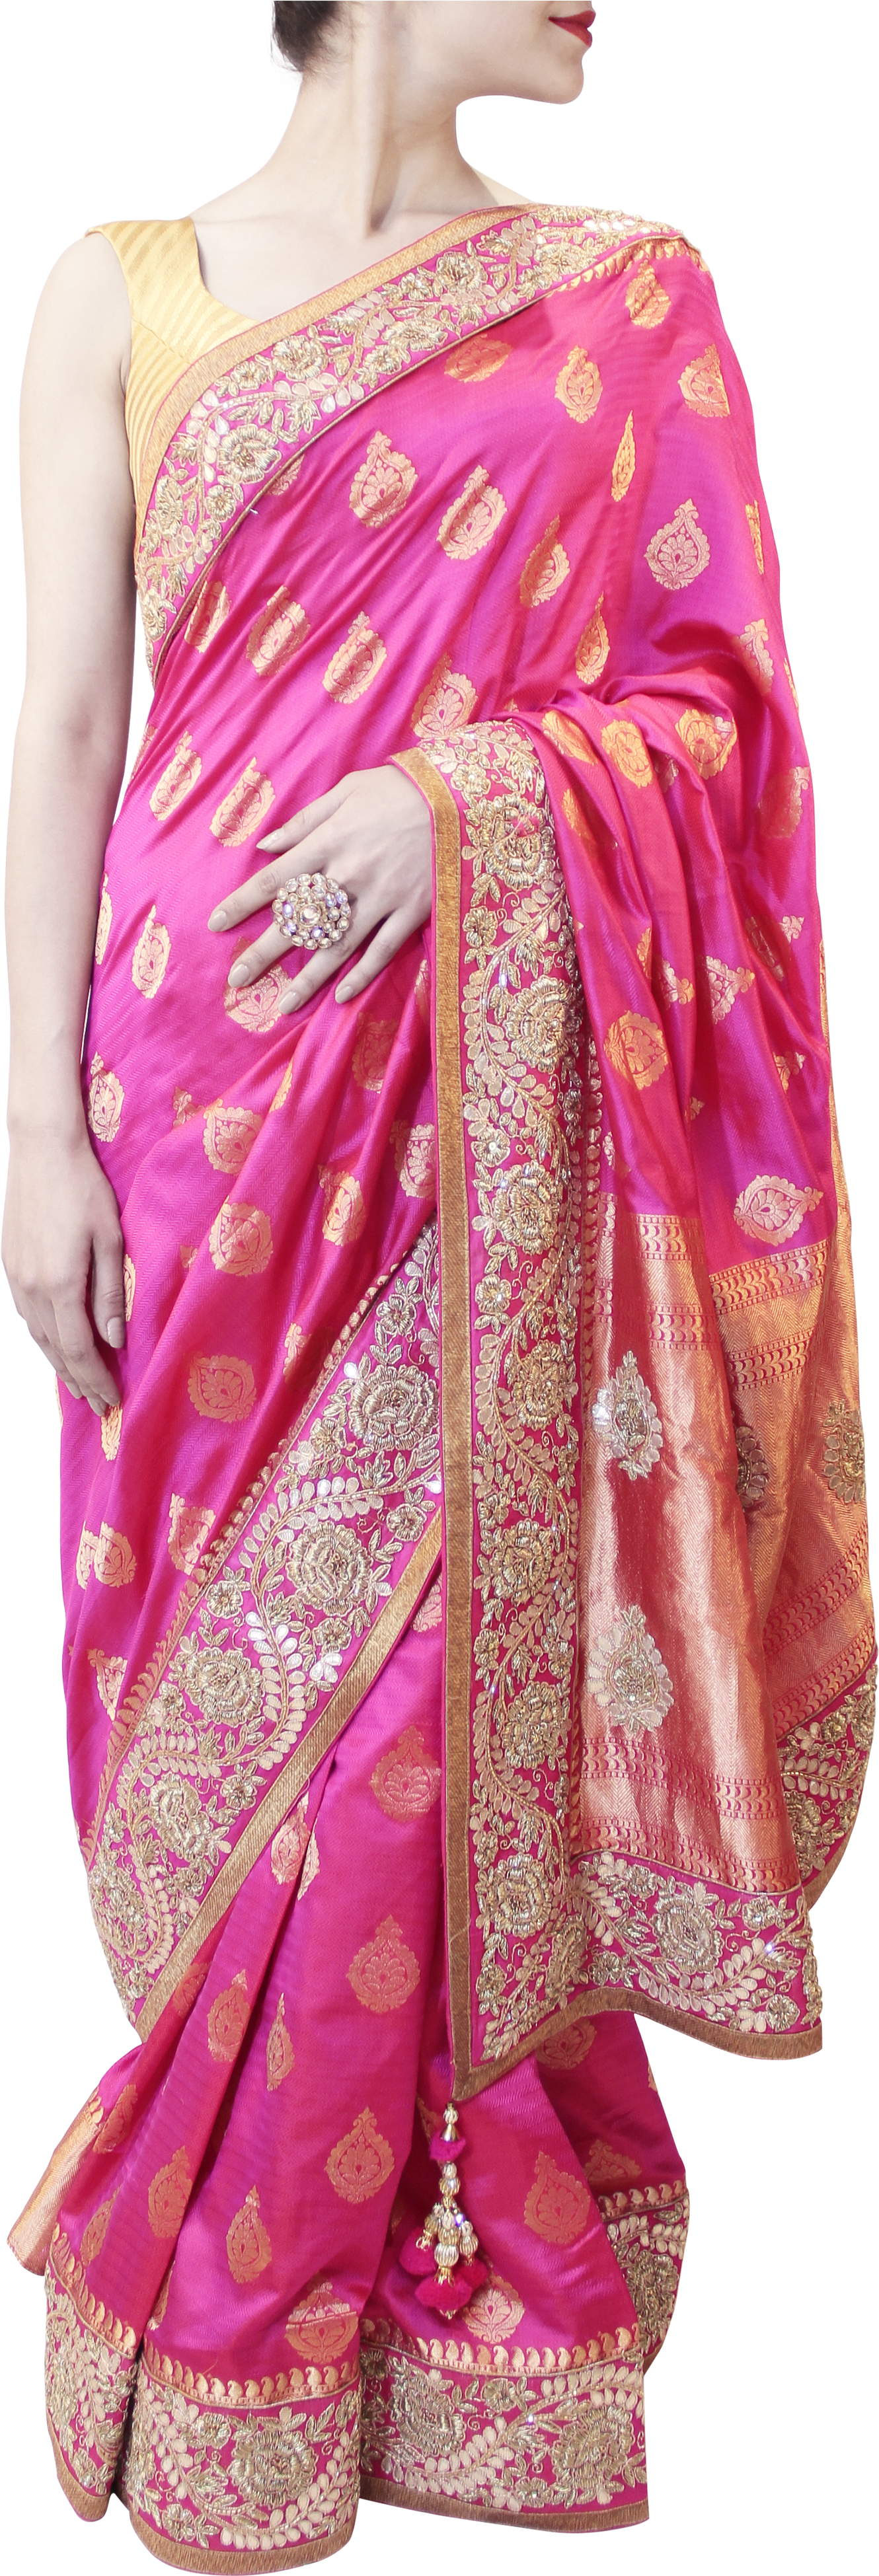 Elegant Pink Sareewith Gold Embroidery PNG